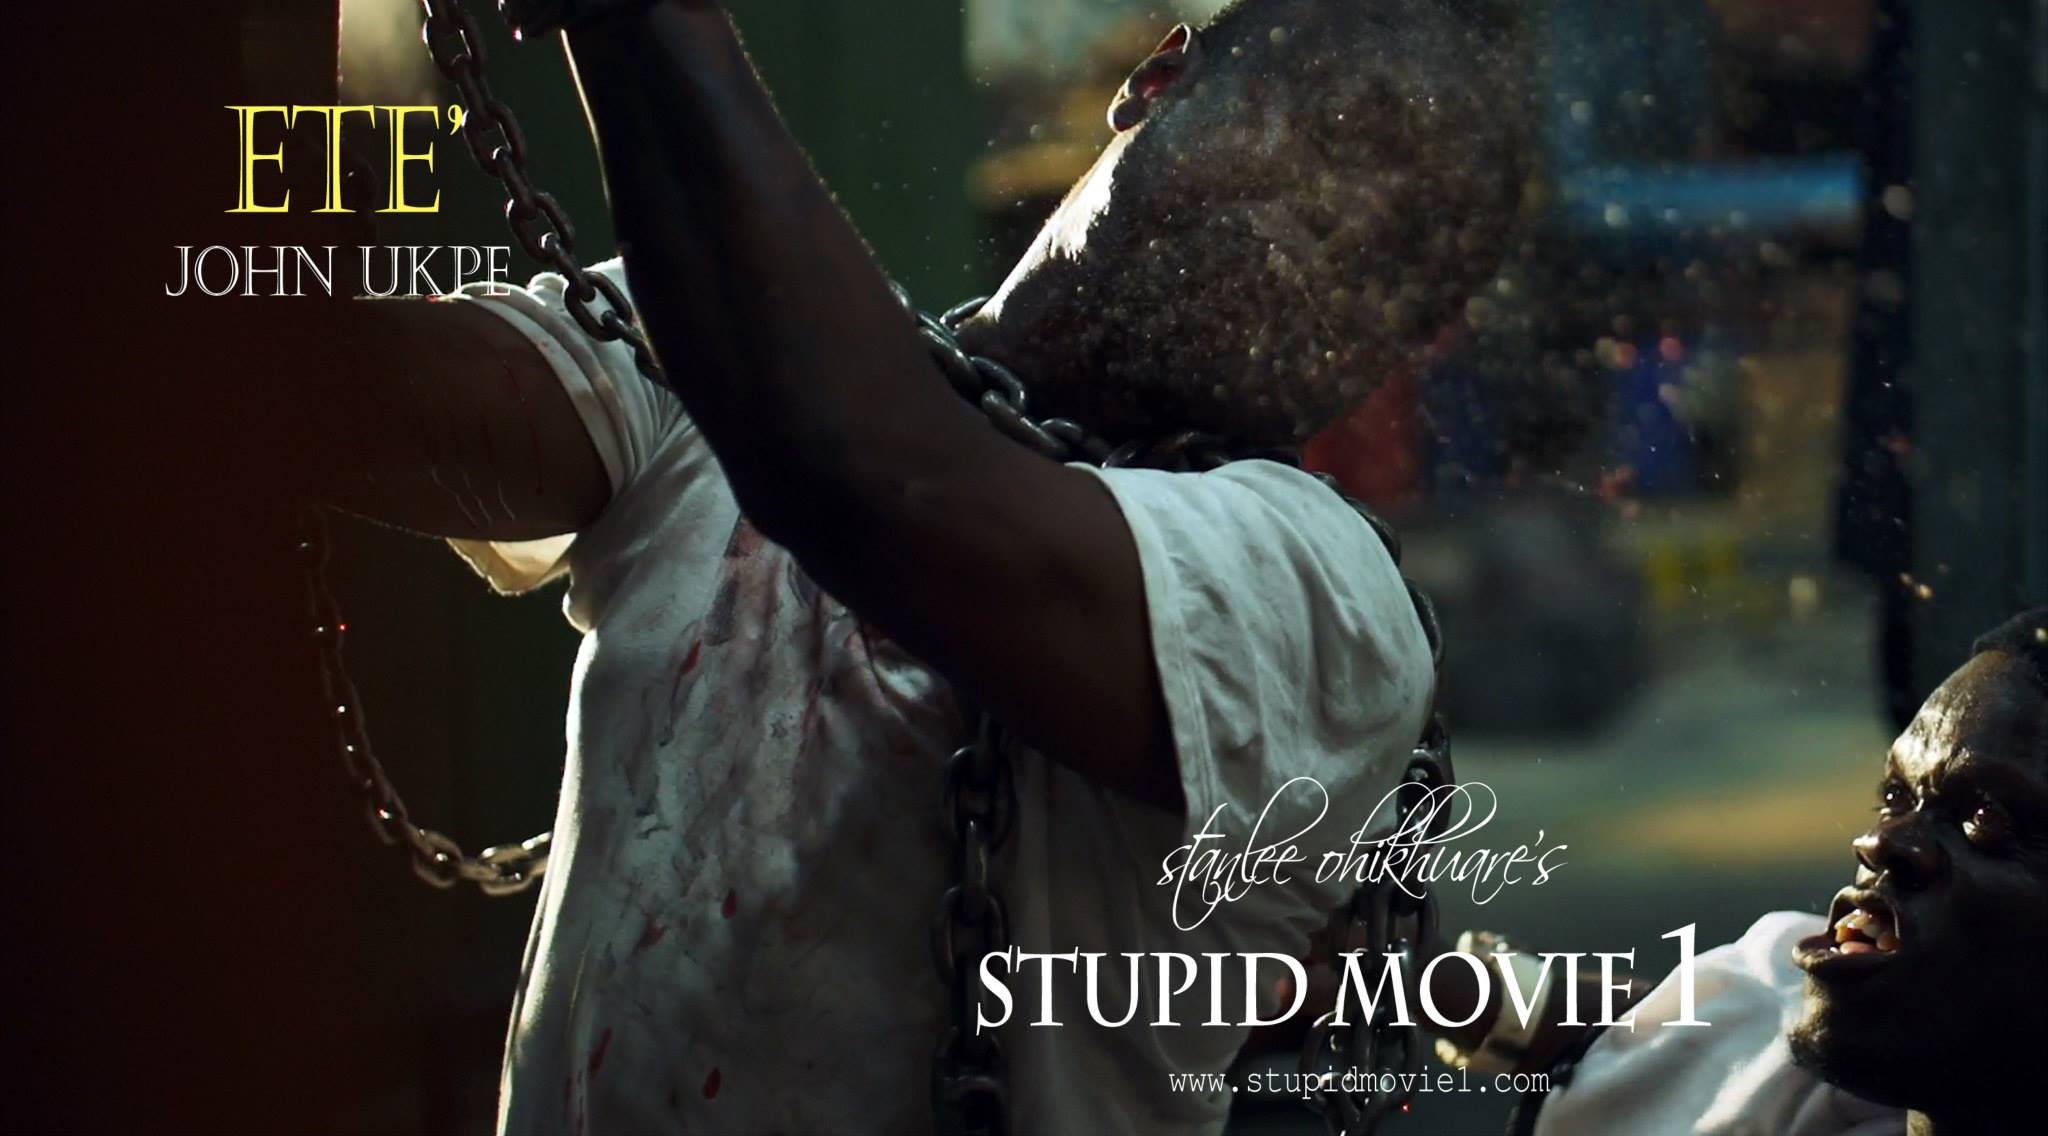 CHARACTER POSTER (ETE) for Stanlee Ohikhuare's STUPID MOVIE 1